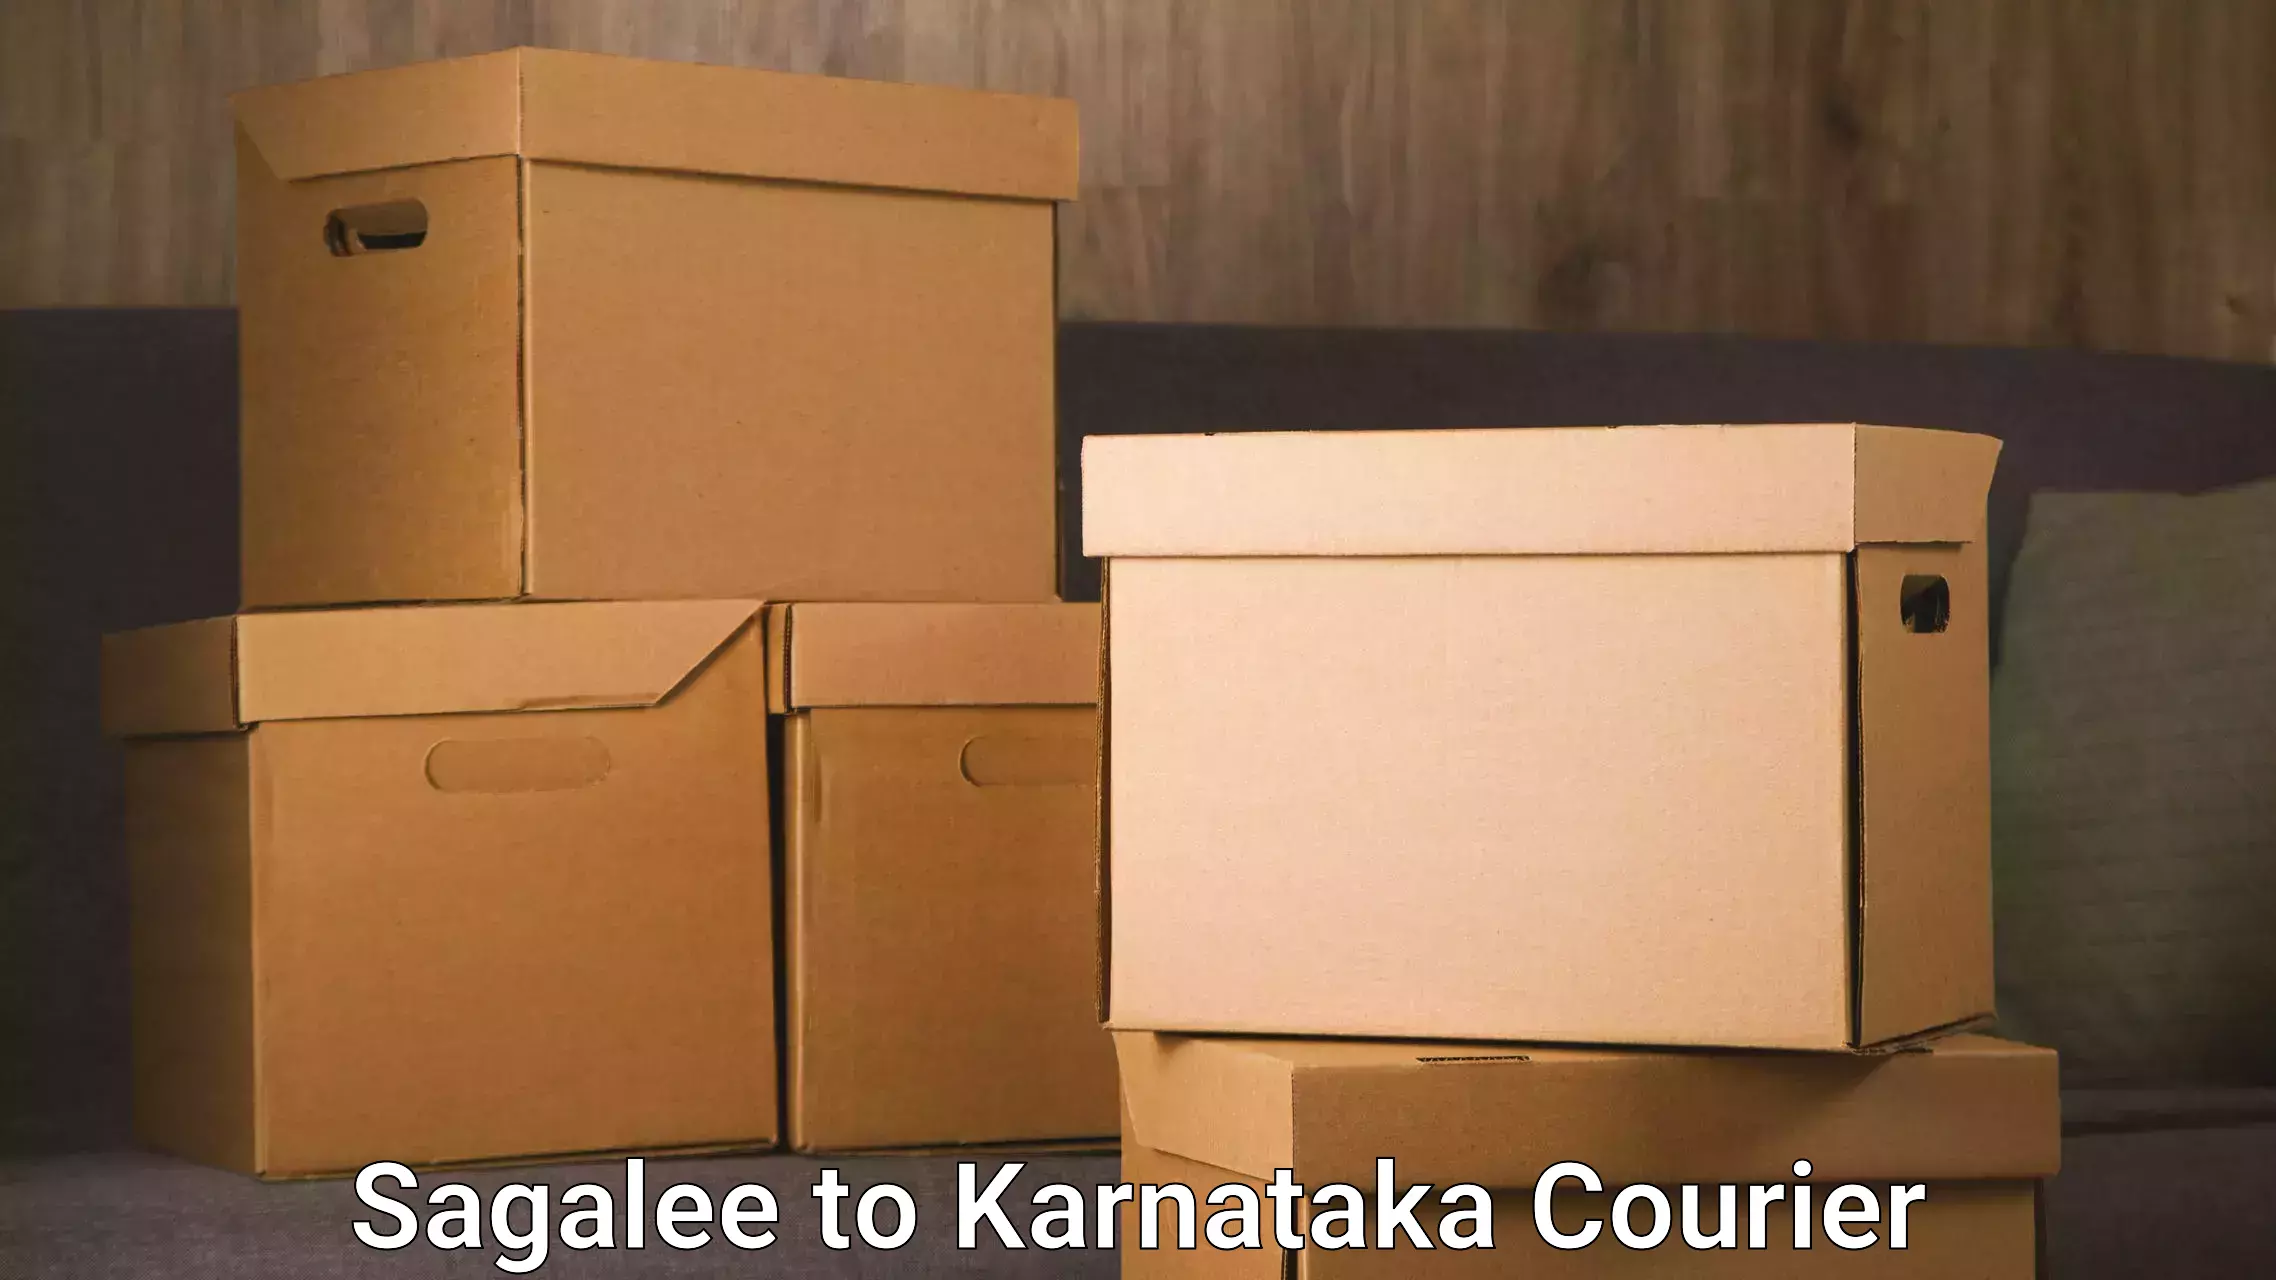 Same-day delivery options Sagalee to Chikkamagaluru